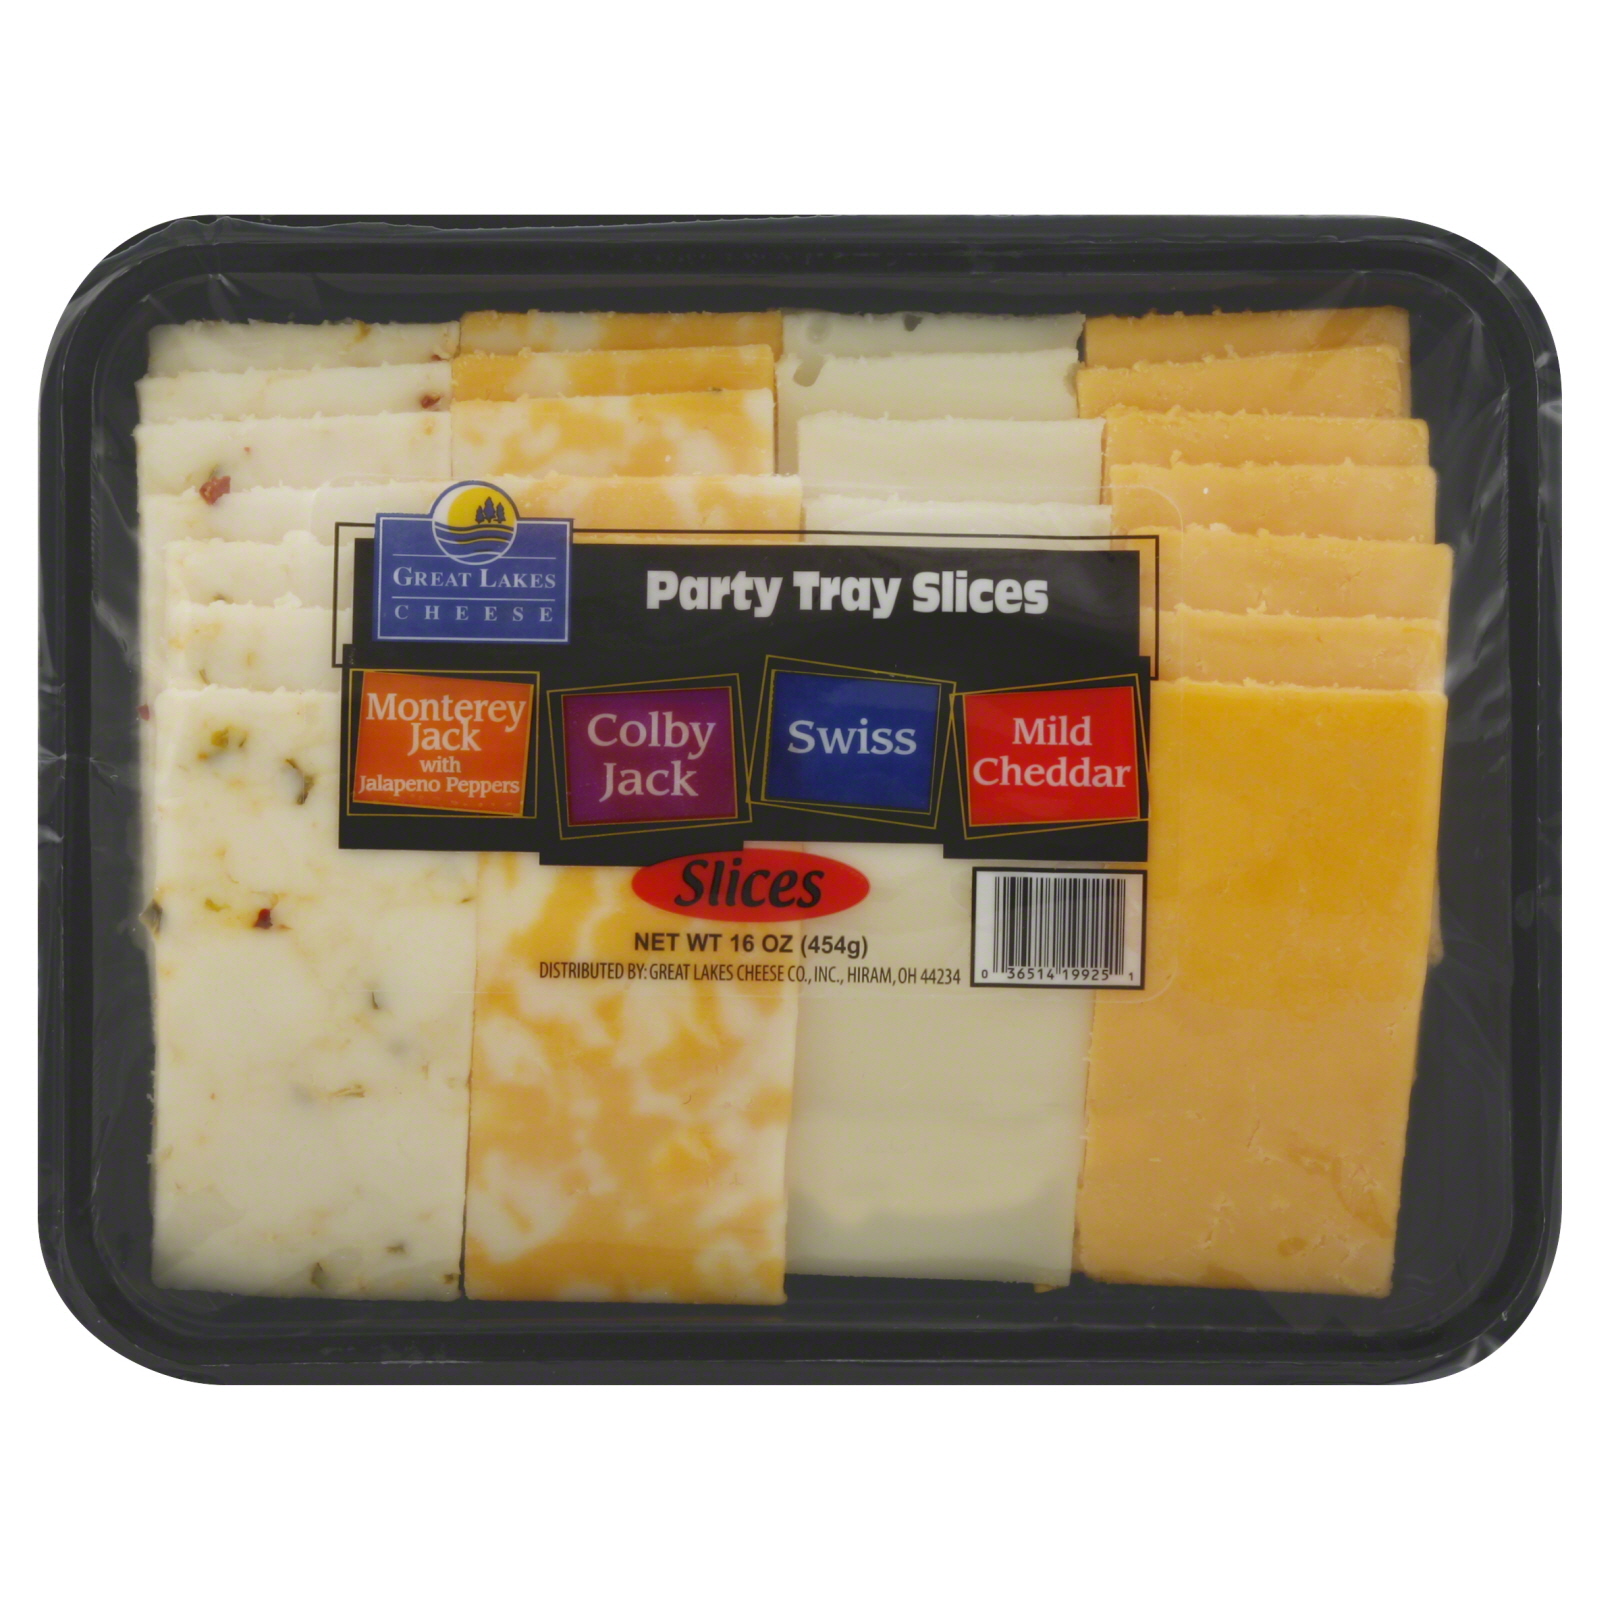 Great Lakes Cheese Party Tray Slices, Variety, 16 oz